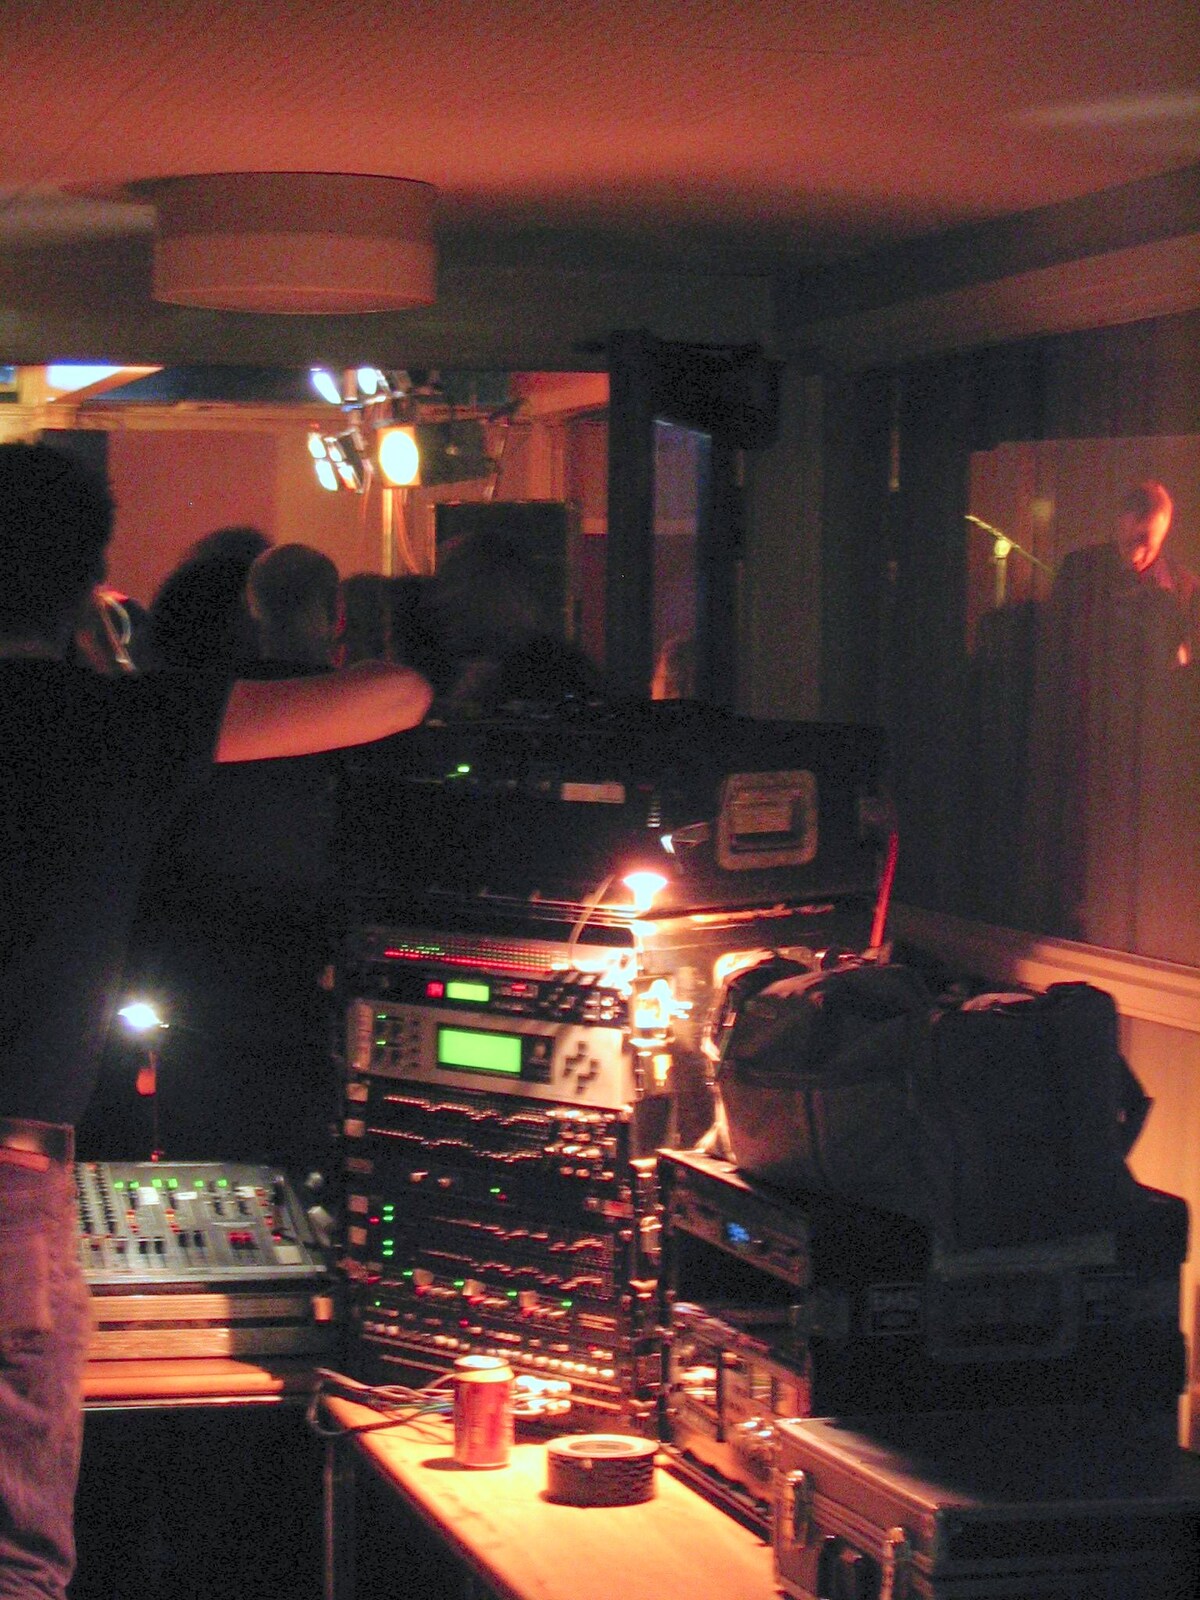 The view from the mixing desk from A CISU Blues Festival at the SCC Social Club, Ipswich, Suffolk - 27th November 2004